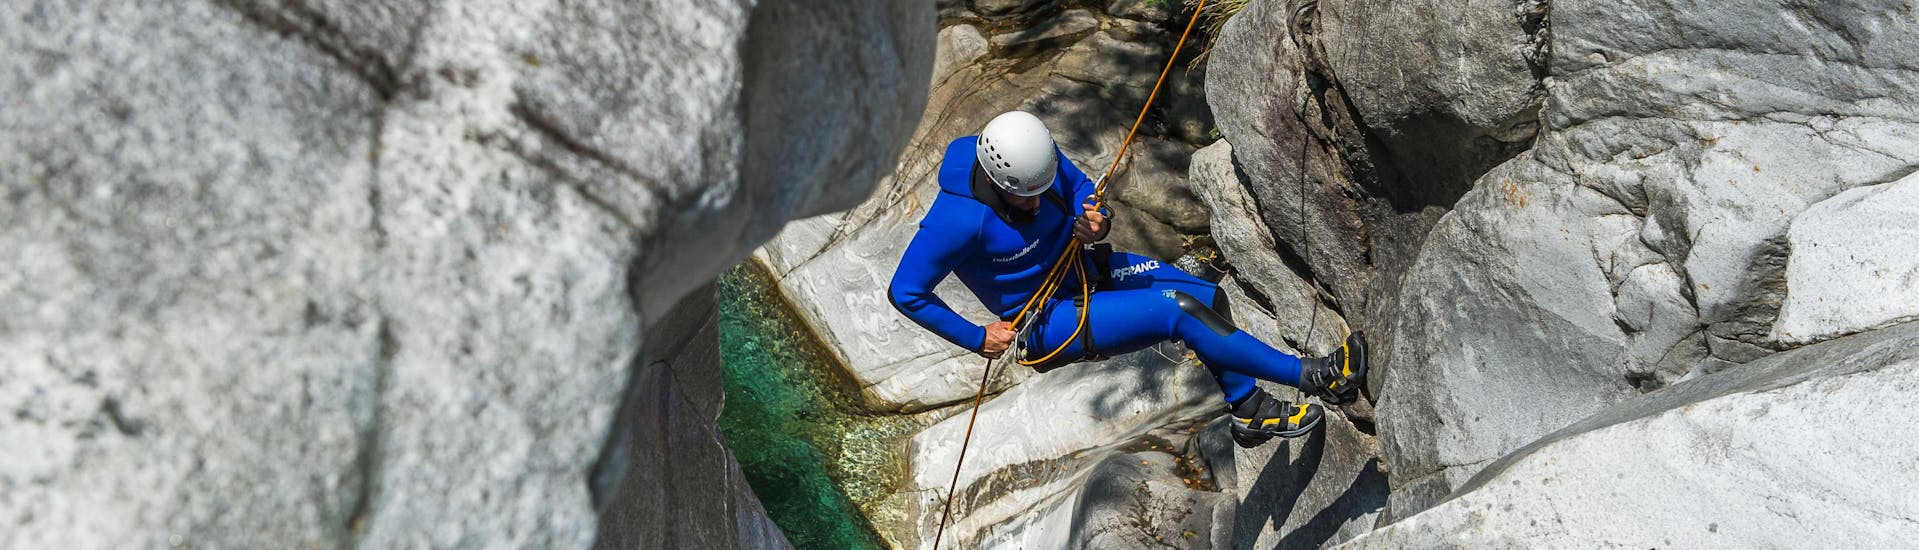 Canyoning in the Iragna Canyon in Ticino from Cresciano.